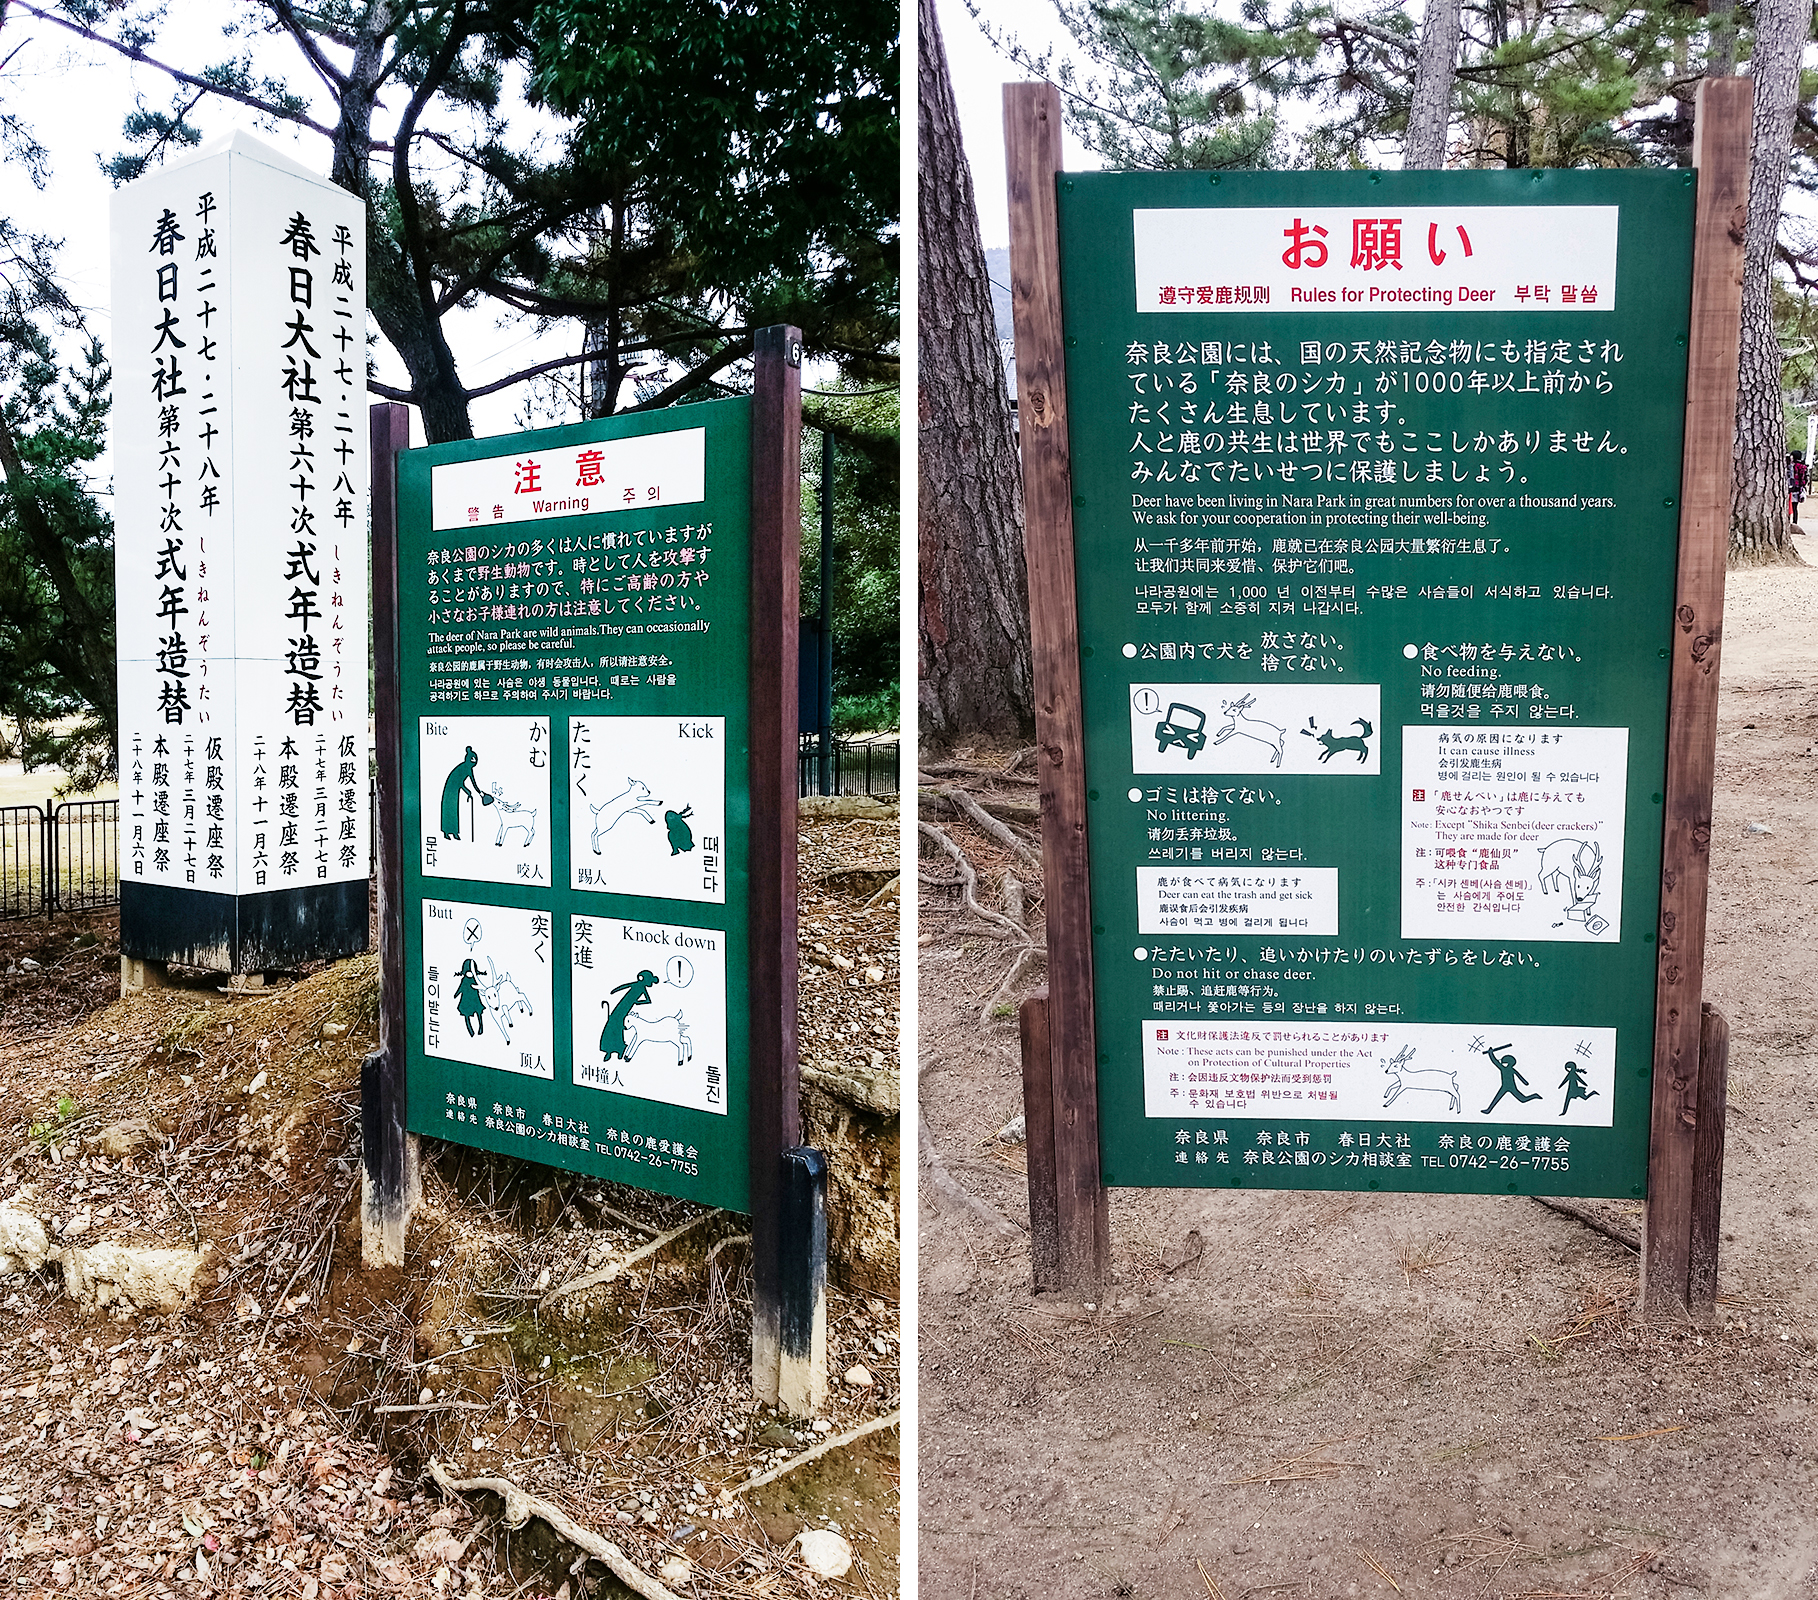 Signs at Nara Park warning of the dangers of getting too close to the deer in the park.